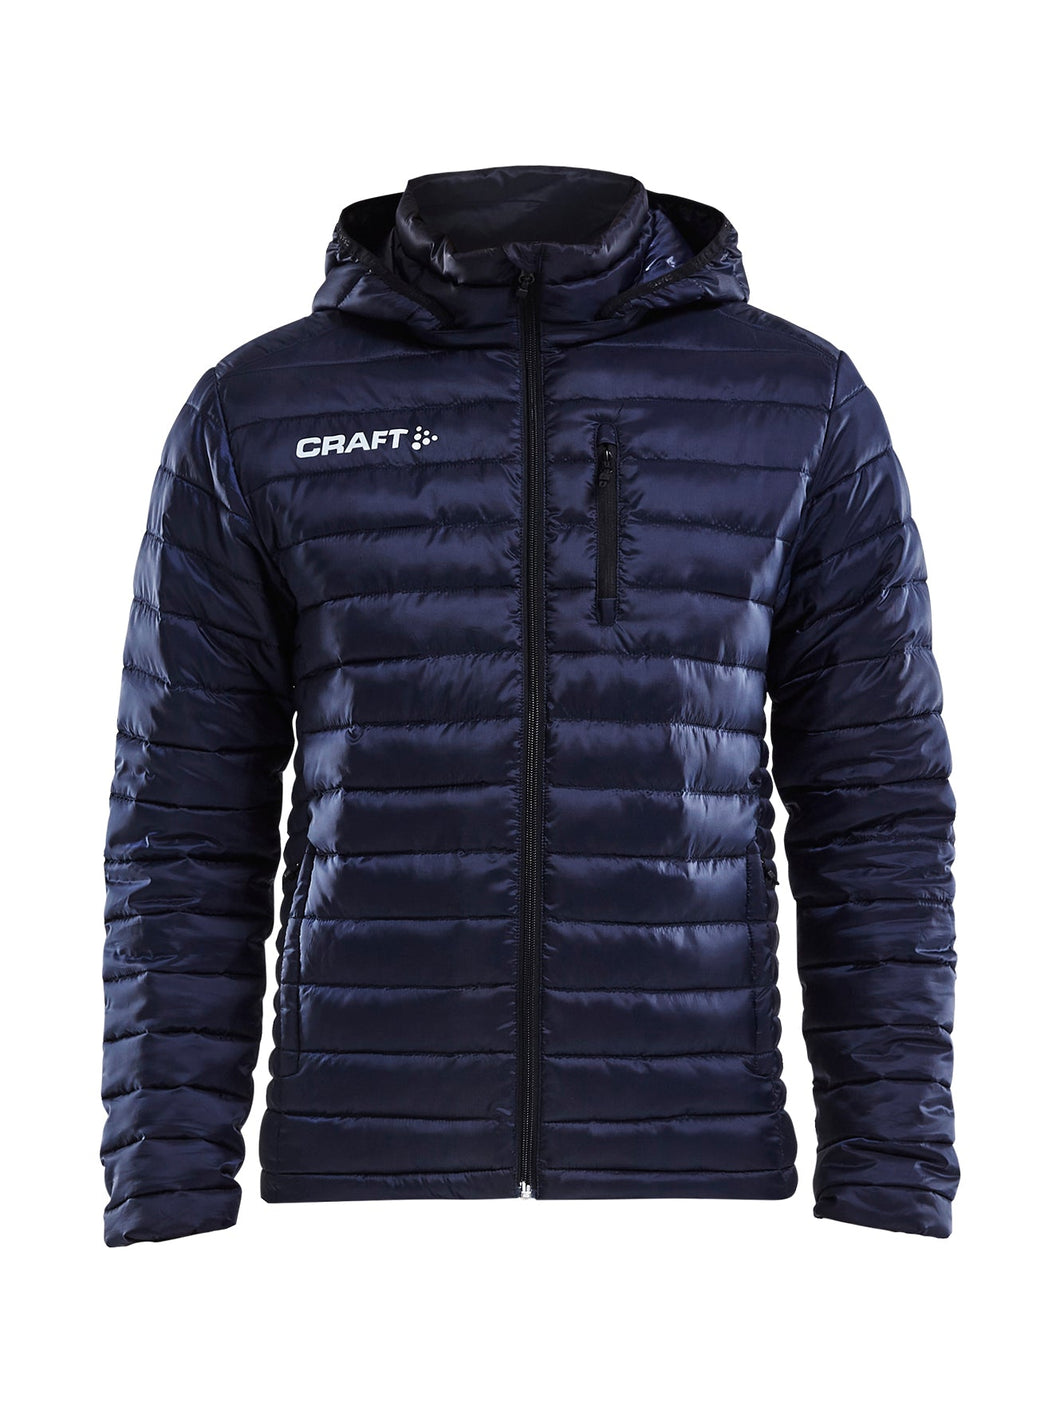 CRAFT ISOLATE JACKET M - NAVY - TG-outlet